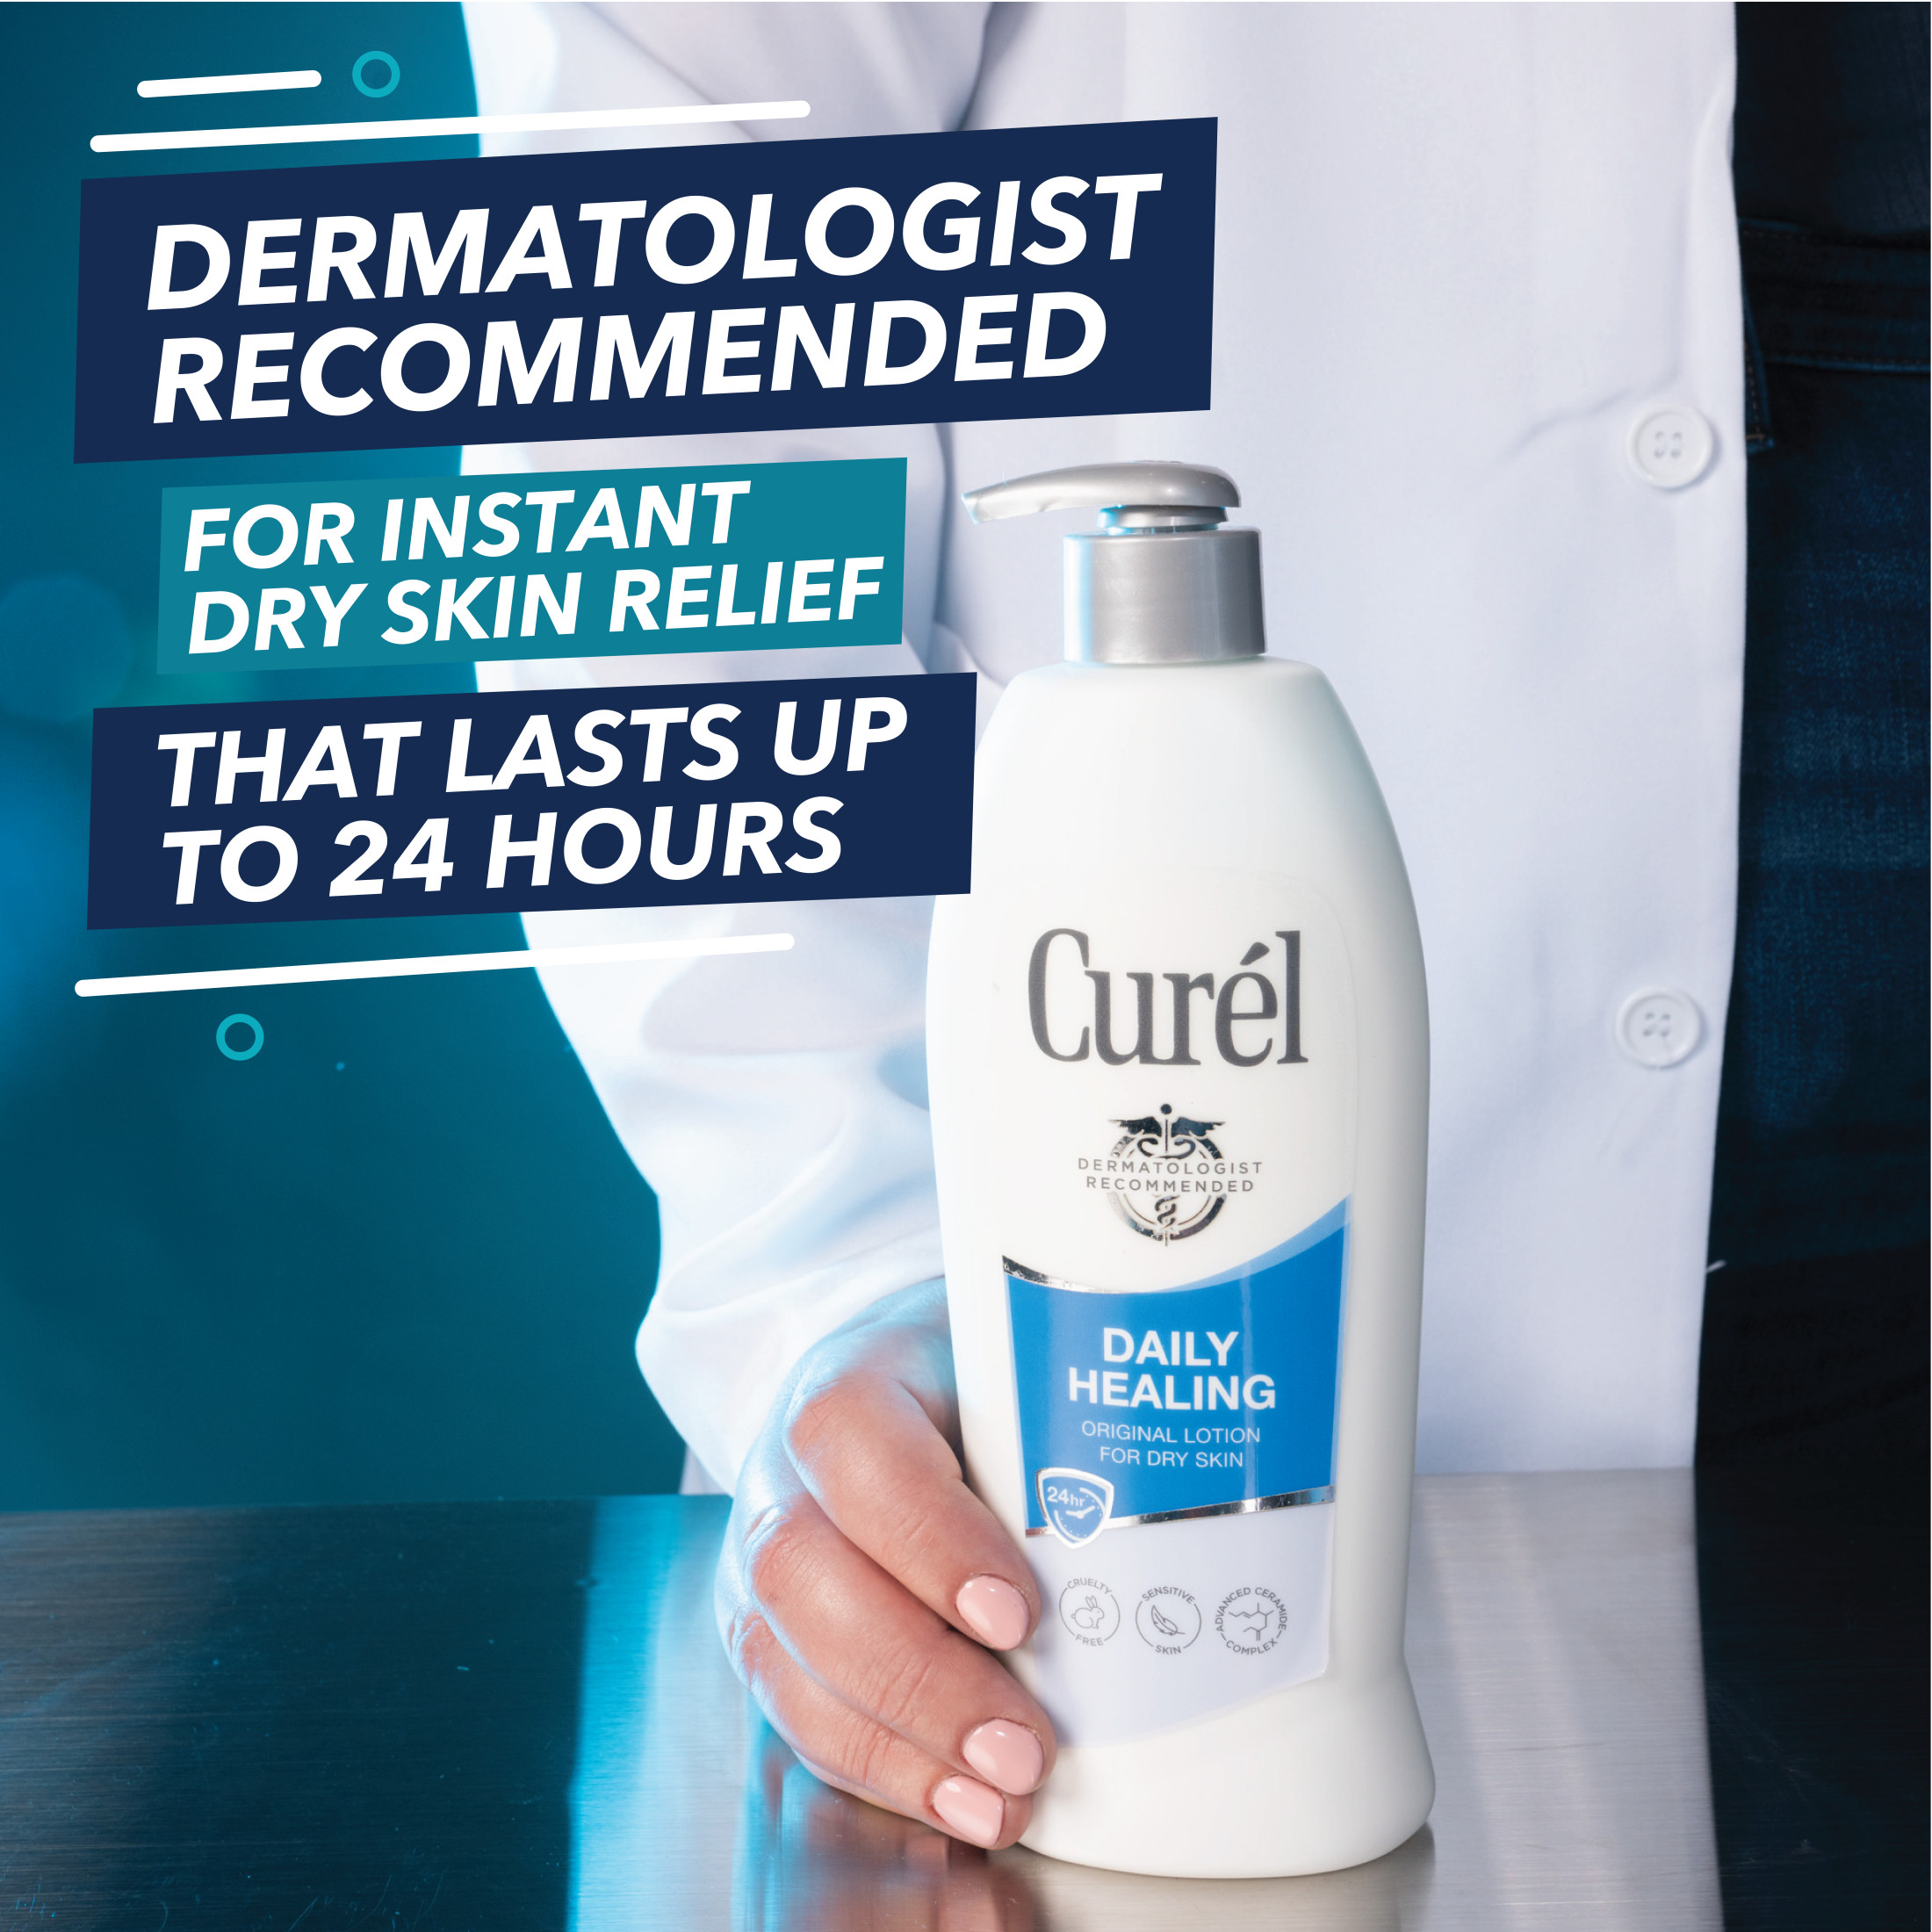 Curel Daily Healing Hand and Body Lotion for Dry Skin, Dermatologist Recommended, with Advanced Ceramides Complex, 20 Ounce Pump Bottle - image 2 of 9